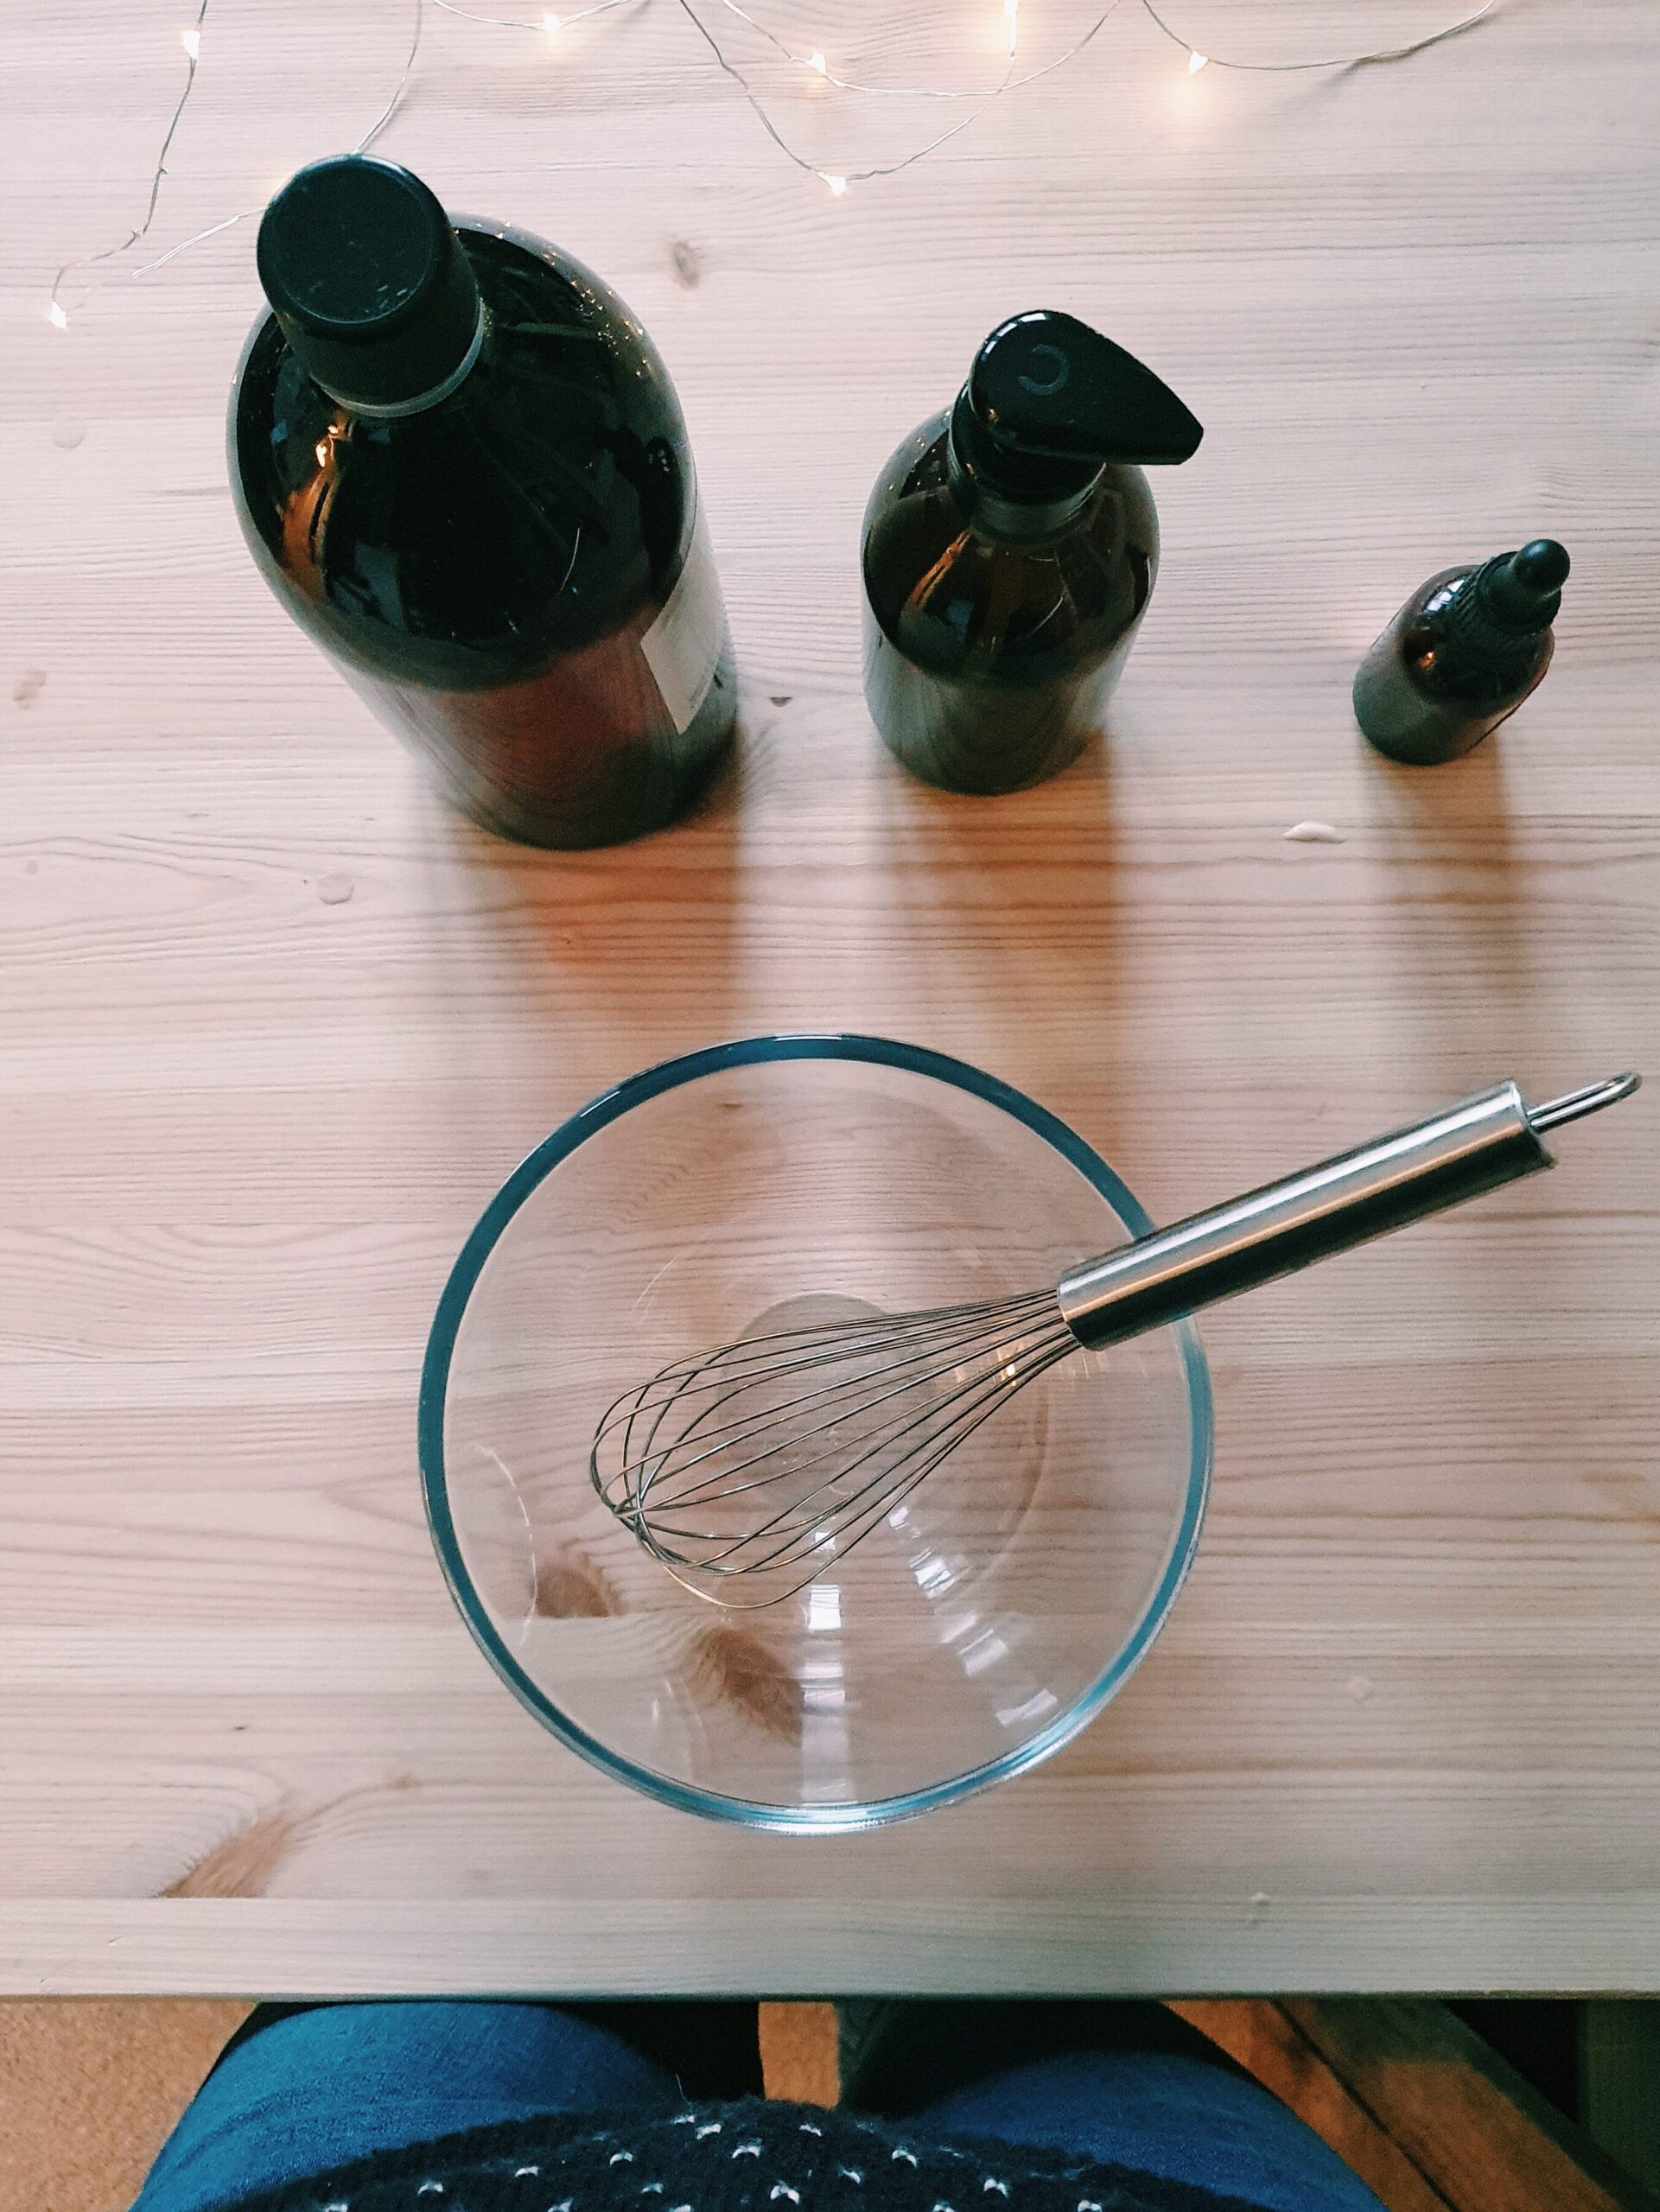 Making a natural liquid soap with essential oils - The Smallest Light